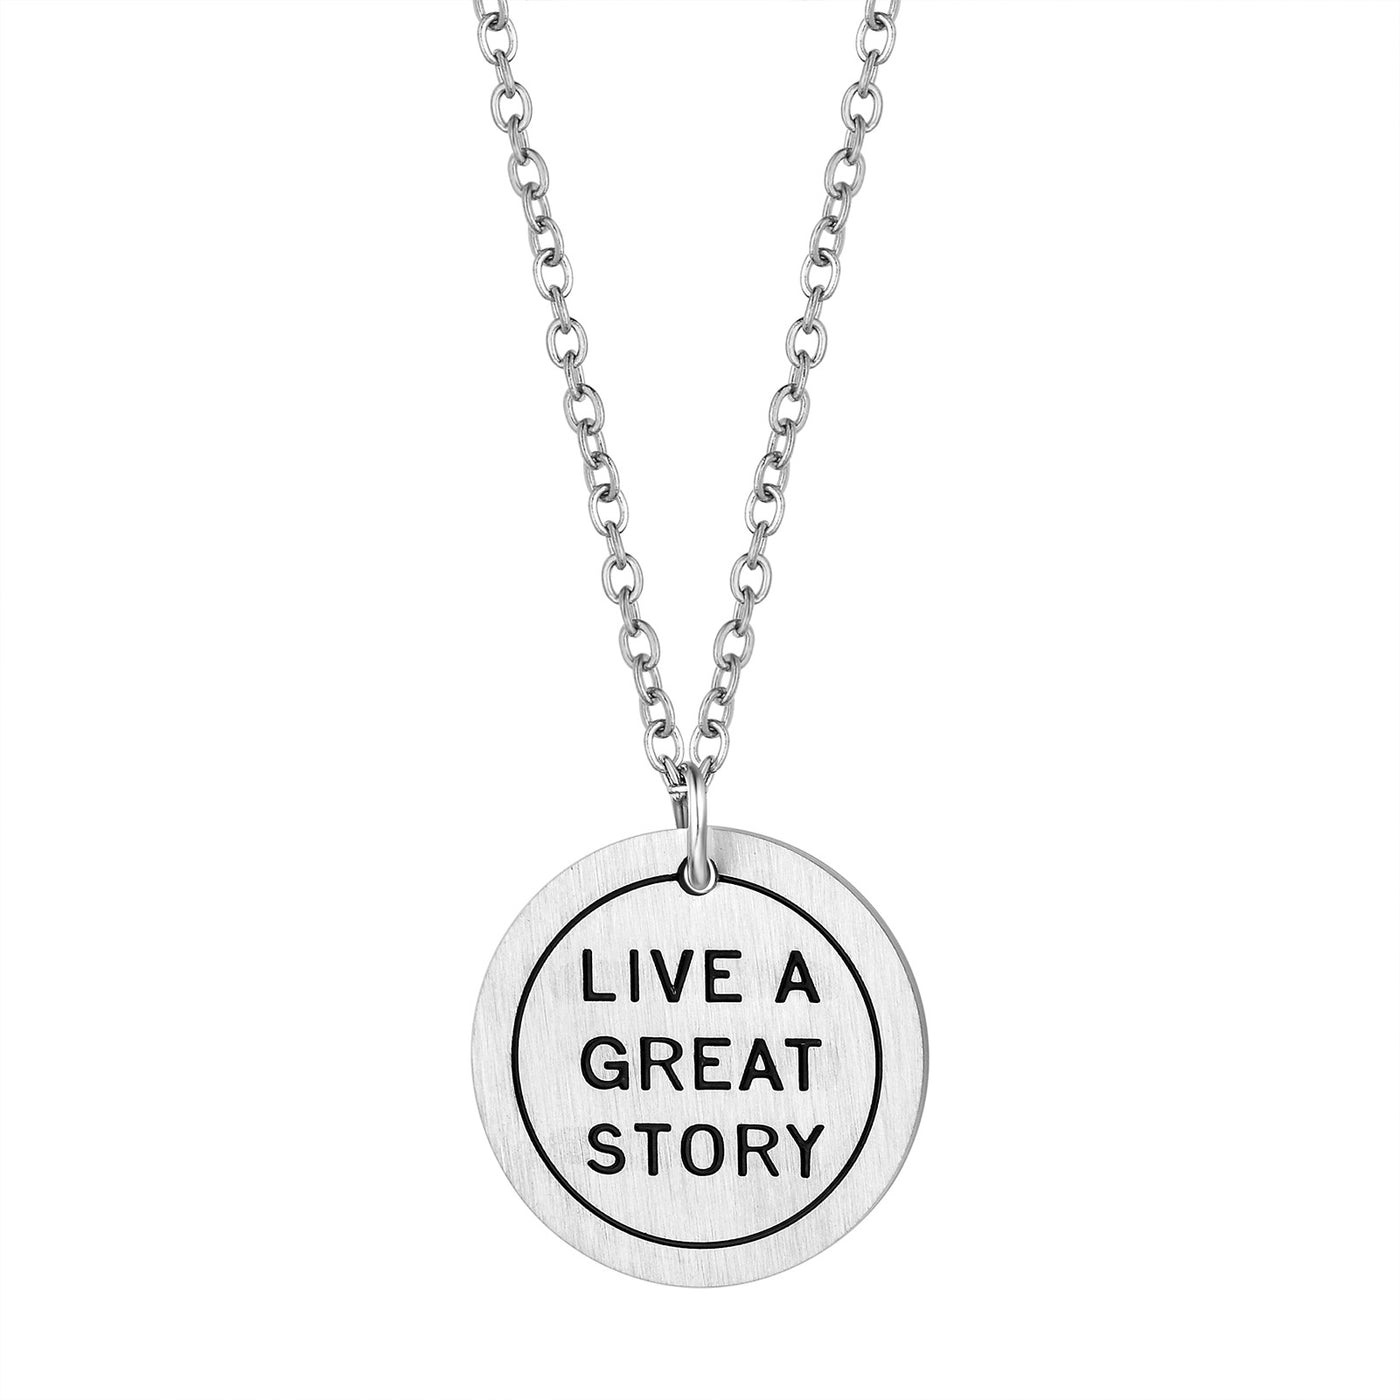 LIVE A GREAT STORY Necklace